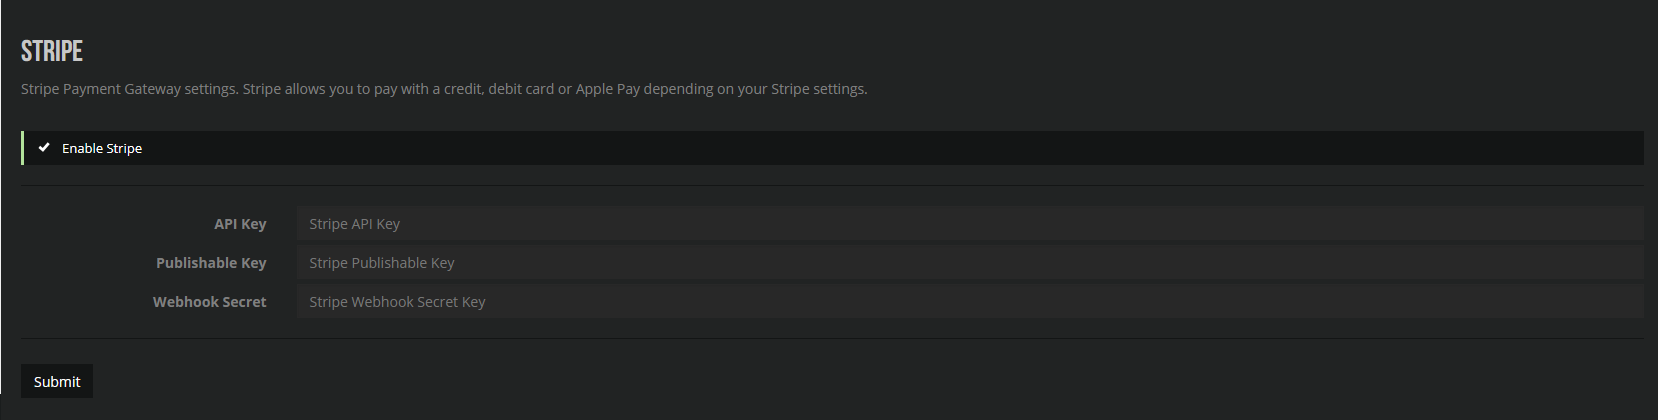 Stripe new 4.png